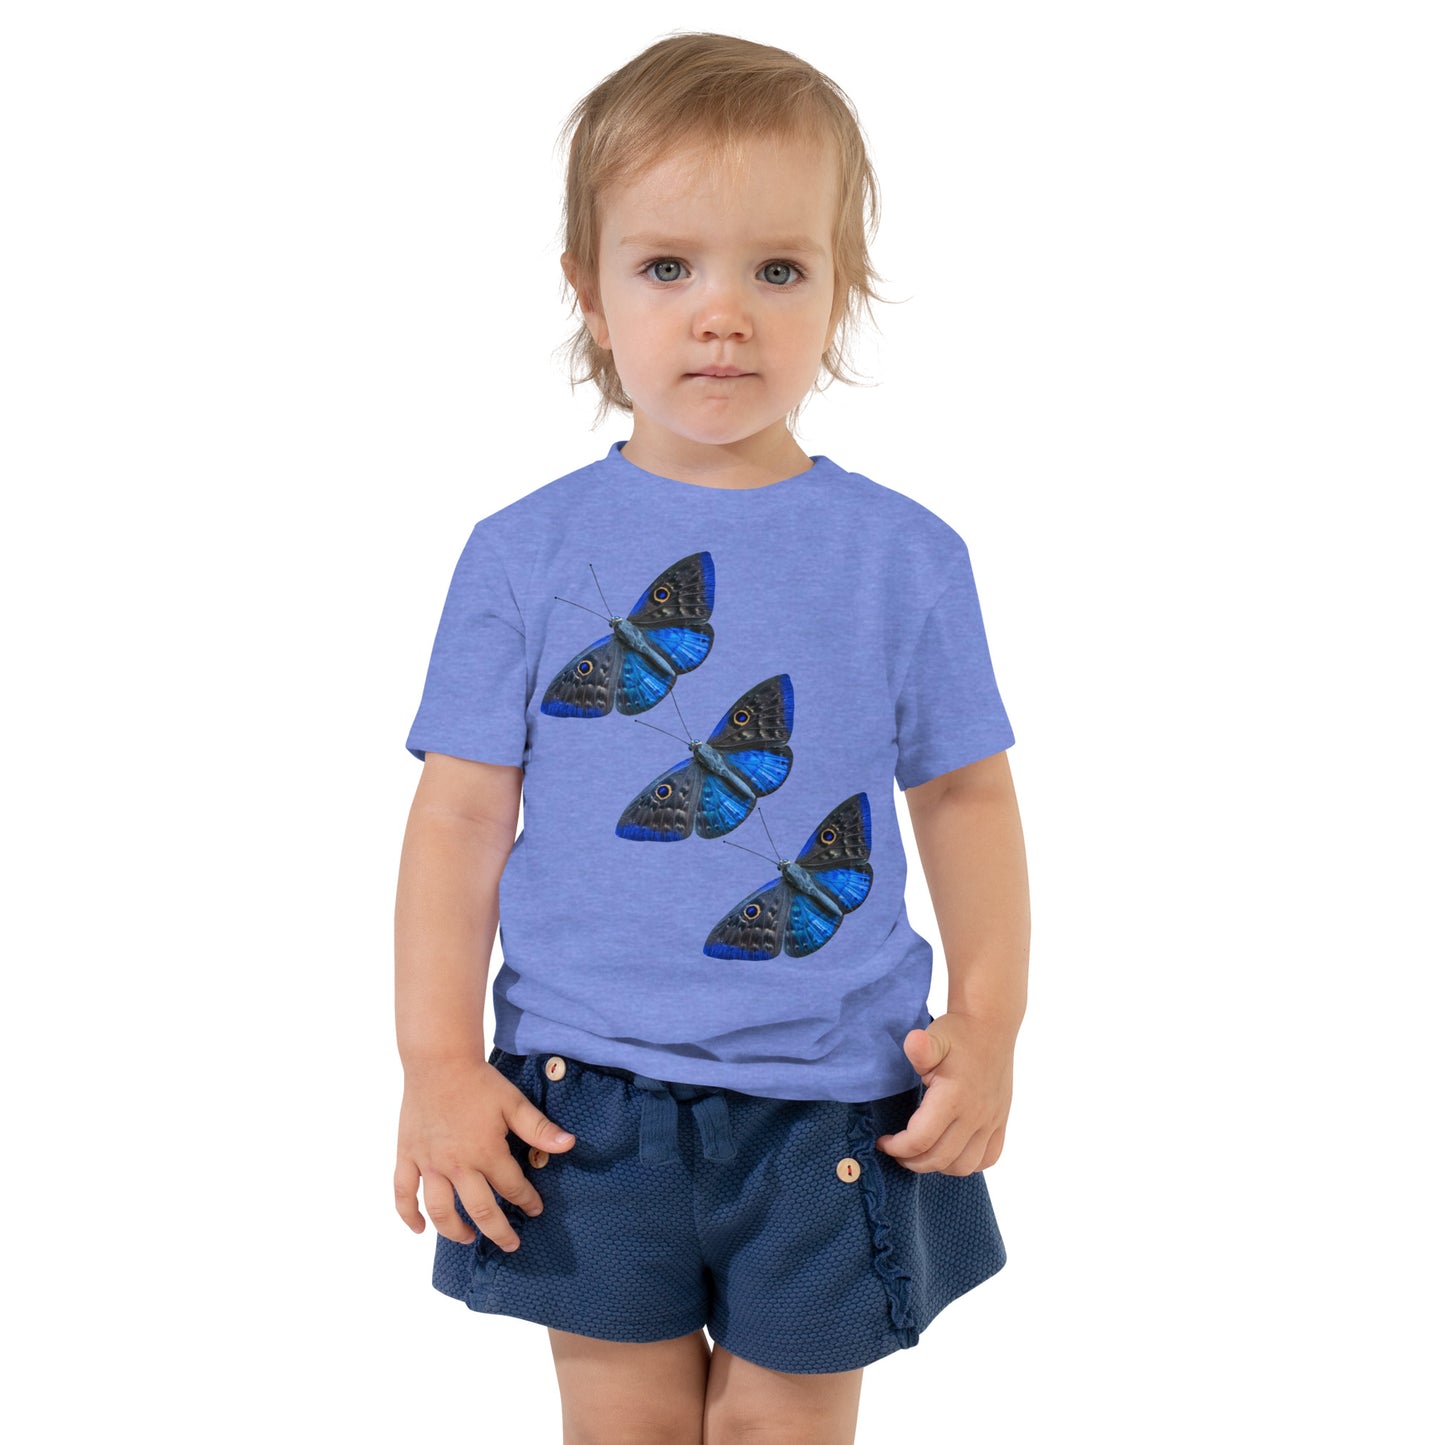 toddler with blue t-shirt with print of 3 blue butterfly's  